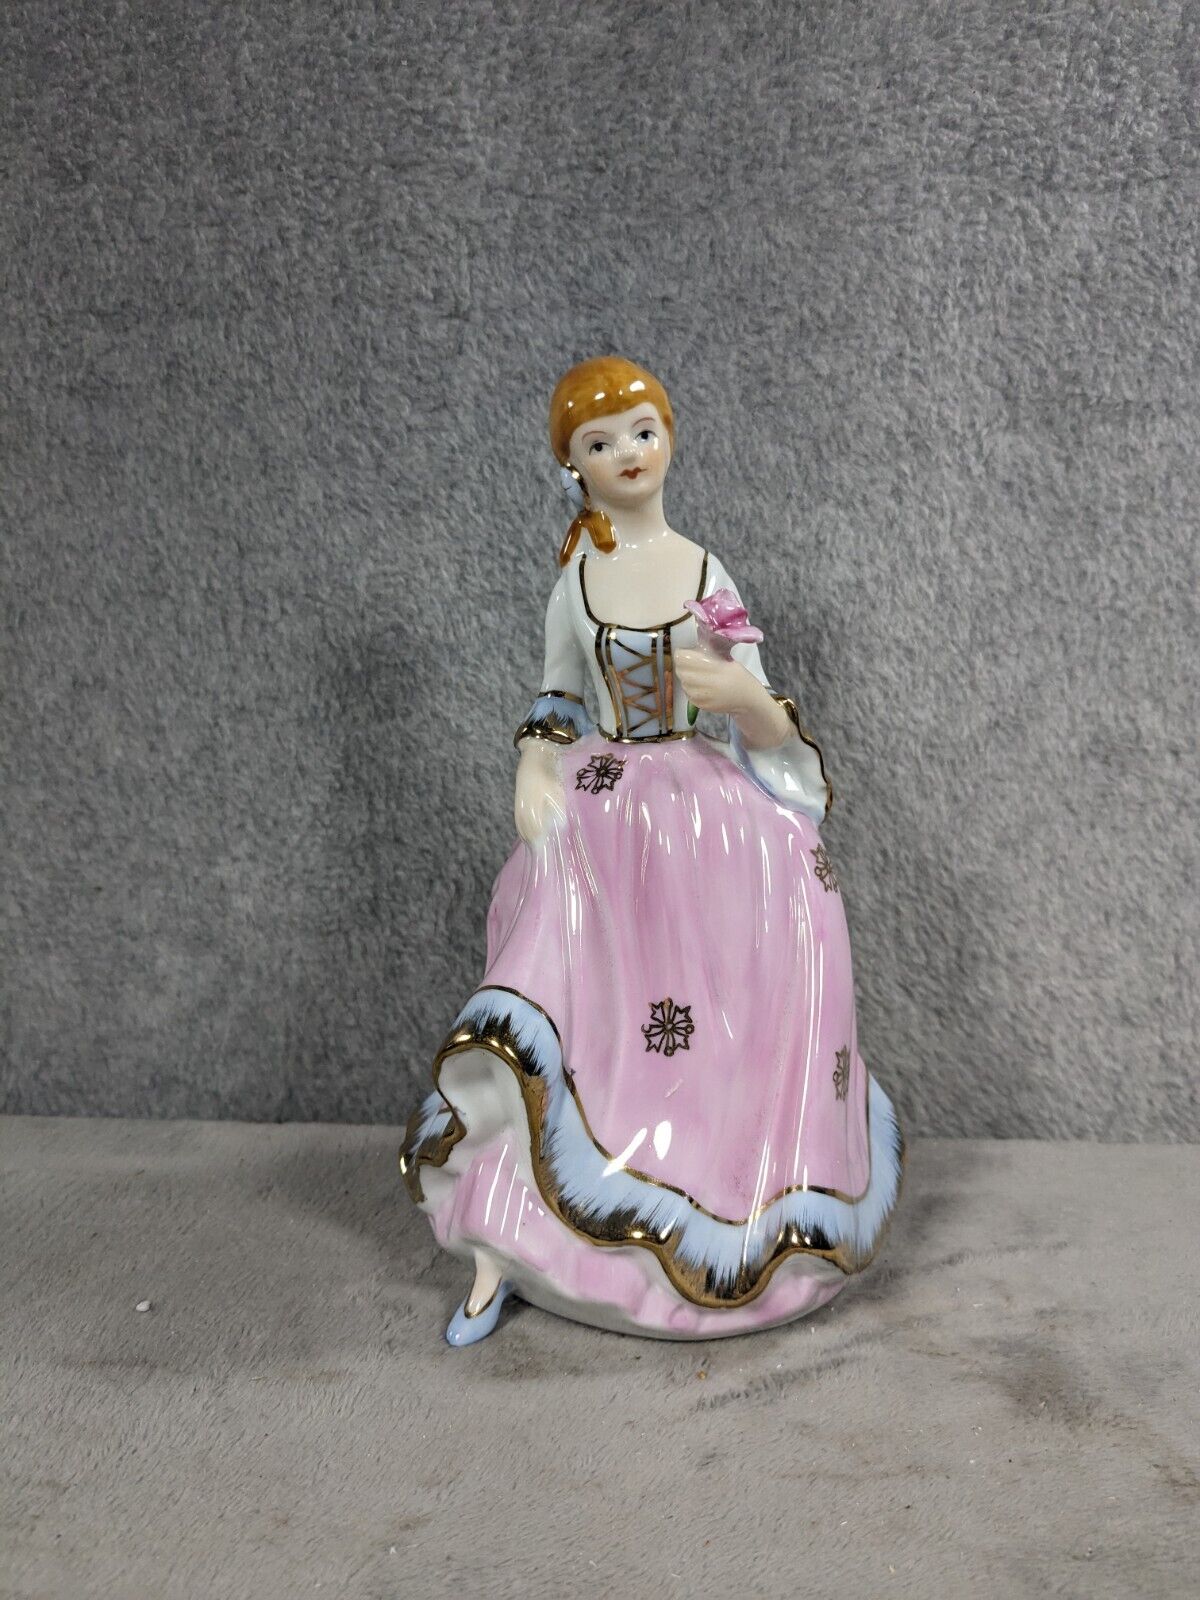 PINK LADY COLONIAL FORMAL DRESS PORCELAIN DOLL FIGURINE 8\